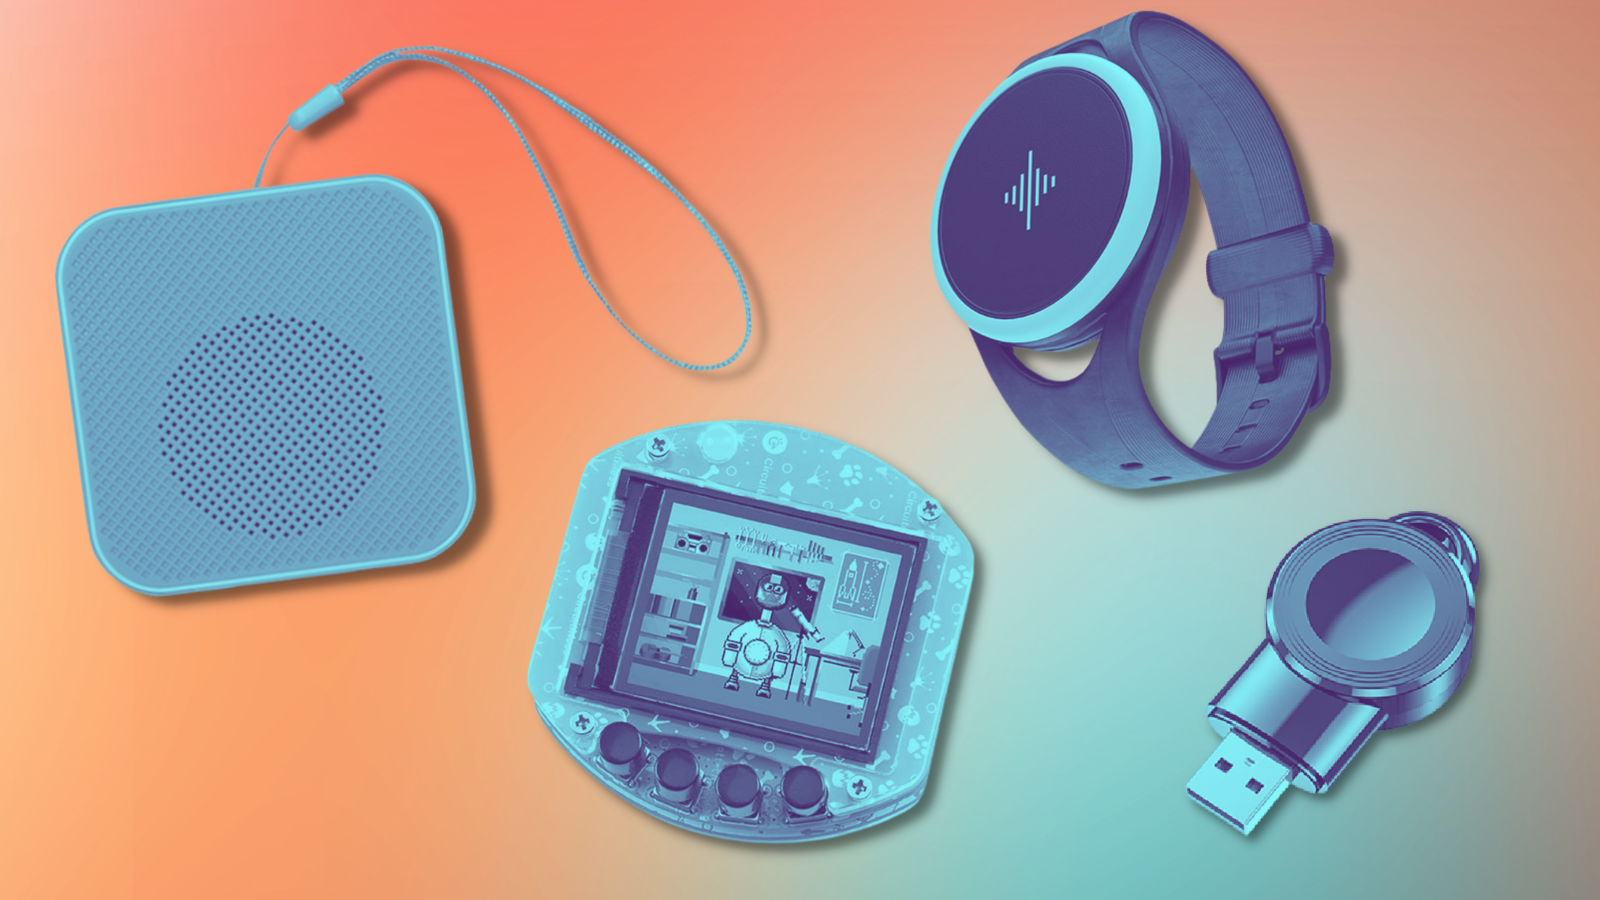 speaker, digital pet, watch, and usb charger with blue tint and orange and blue background